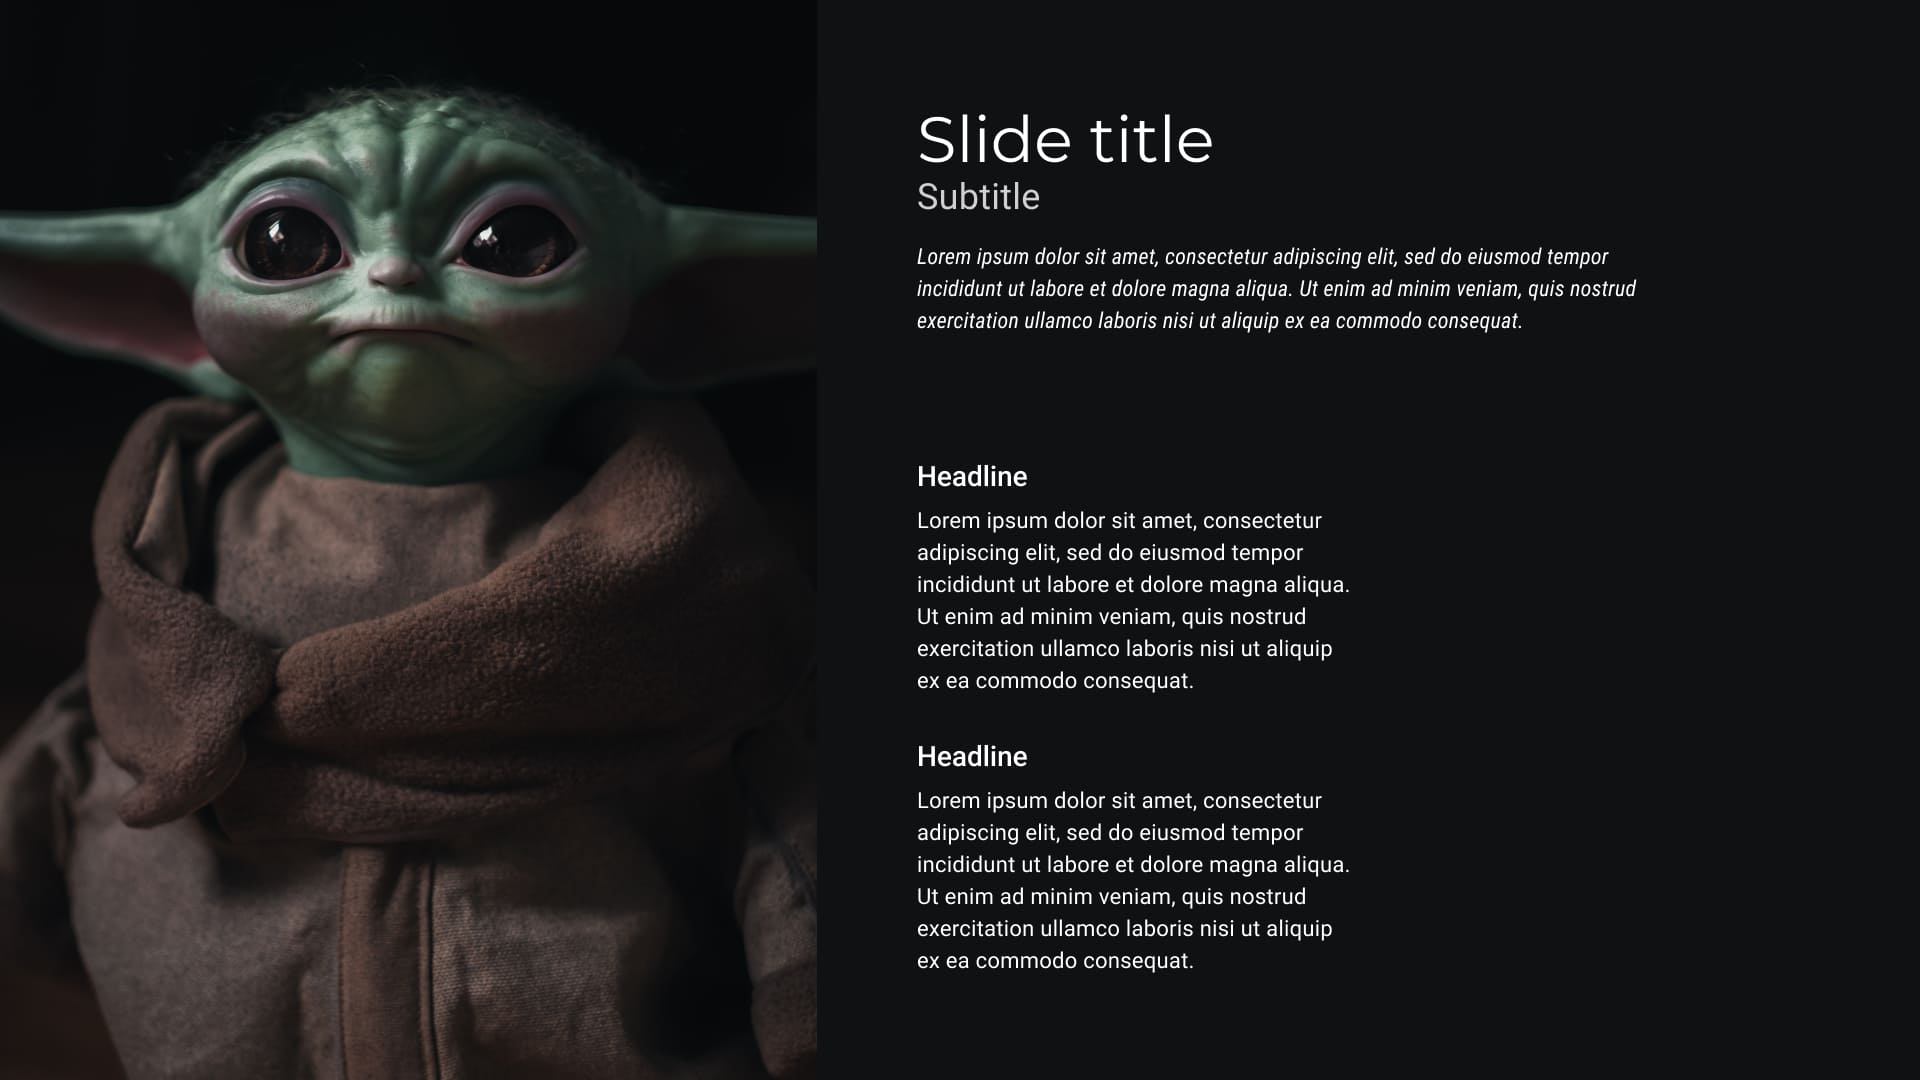 A slide with an inscription and yoda.